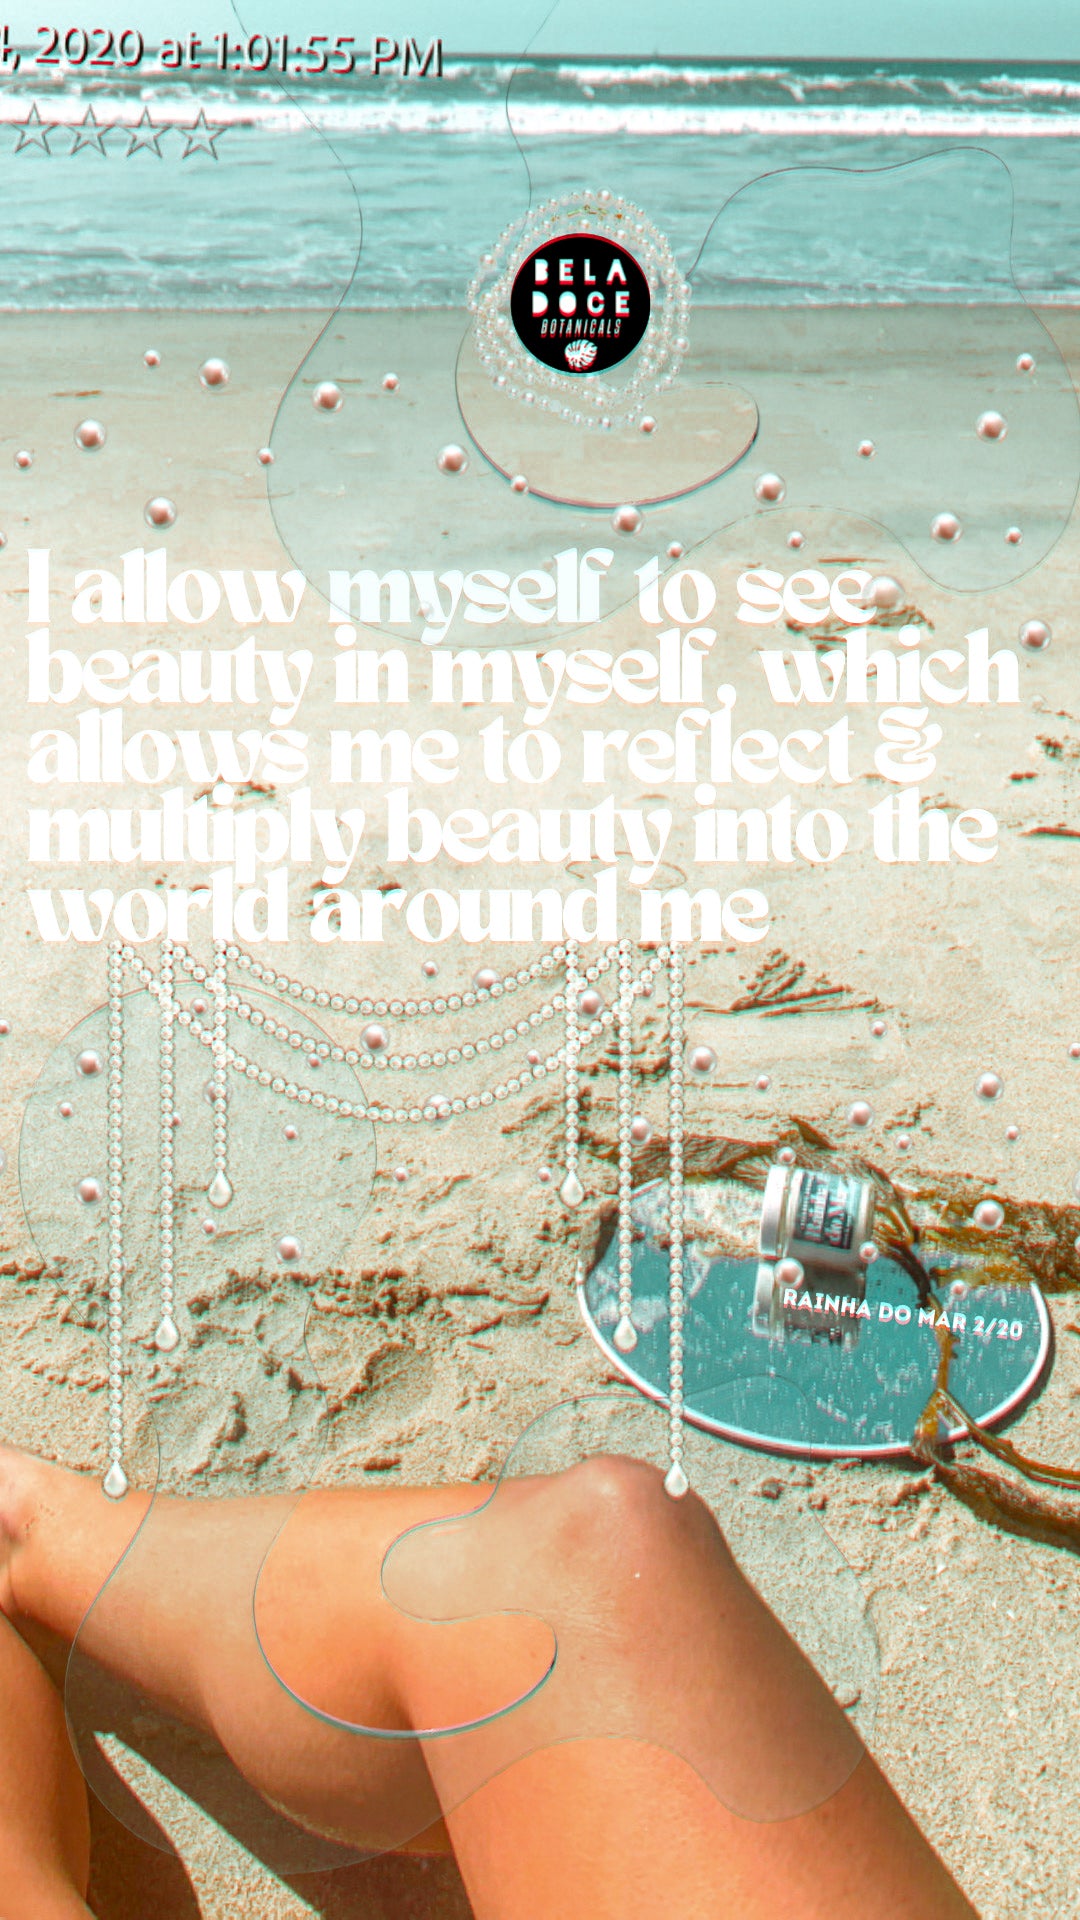 I see beauty in myself which allows me to reflect & multiply beauty into world around me” image description: horizon of a beach, a behind the scenes photo of a beladoce botanicals product shoot. a mirror lays on the sand with kelp laid across with a beladoce botanicals rainha do mar candle in 2021